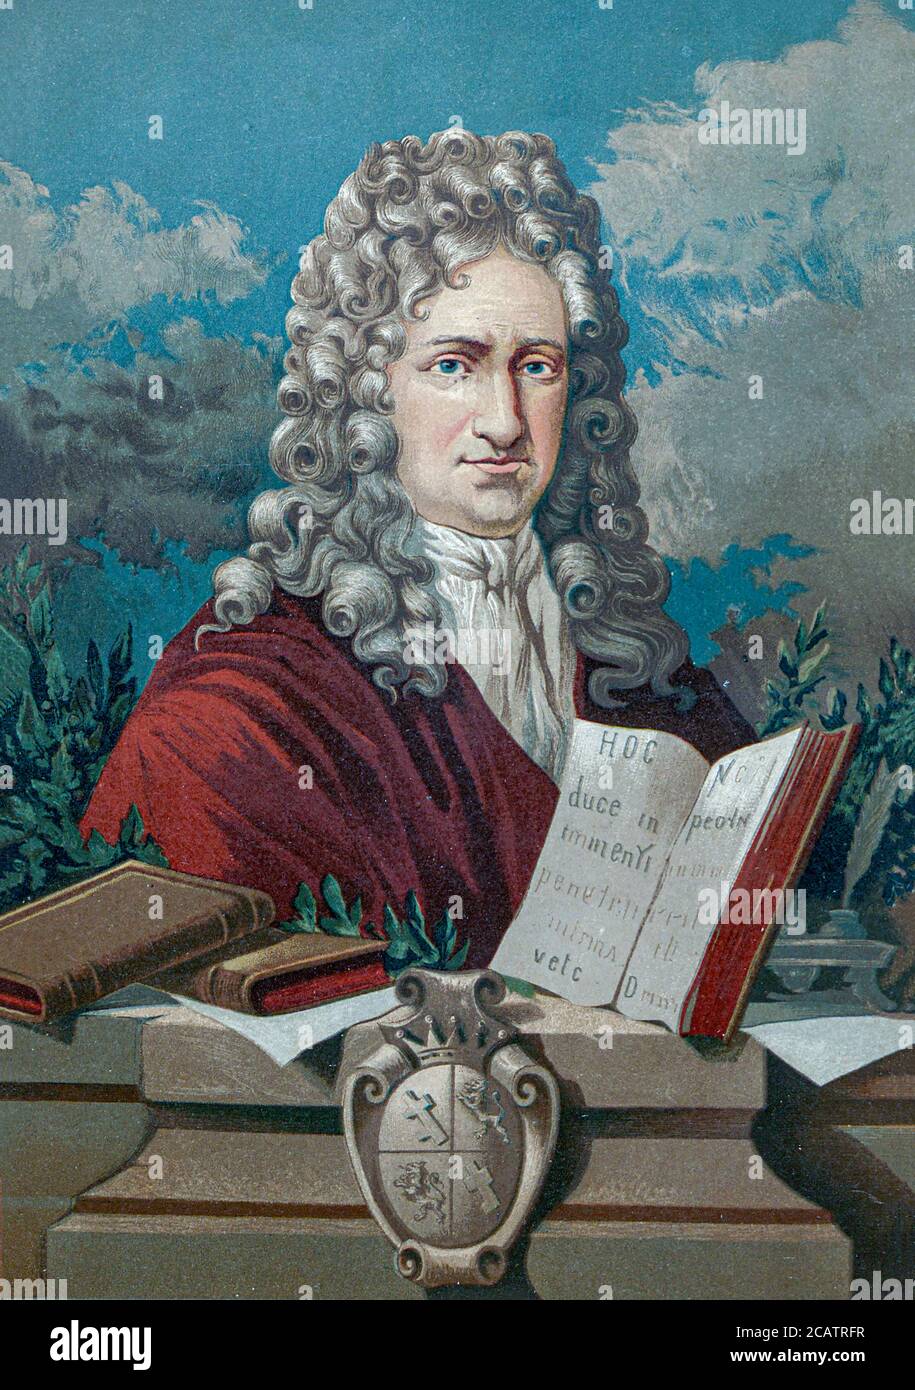 Gottfried Wilhelm (von) Leibniz (Leibnitz) (1 July 1646 – 14 November 1716) was a prominent German polymath and one of the most important logicians, mathematicians and natural philosophers of the Enlightenment. From the book La ciencia y sus hombres : vidas de los sabios ilustres desde la antigüedad hasta el siglo XIX T. 3  [Science and its men: lives of the illustrious sages from antiquity to the 19th century Vol 3] By by Figuier, Louis, (1819-1894); Casabó y Pagés, Pelegrín, n. 1831 Published in Barcelona by D. Jaime Seix, editor , 1879 (Imprenta de Baseda y Giró) Stock Photo